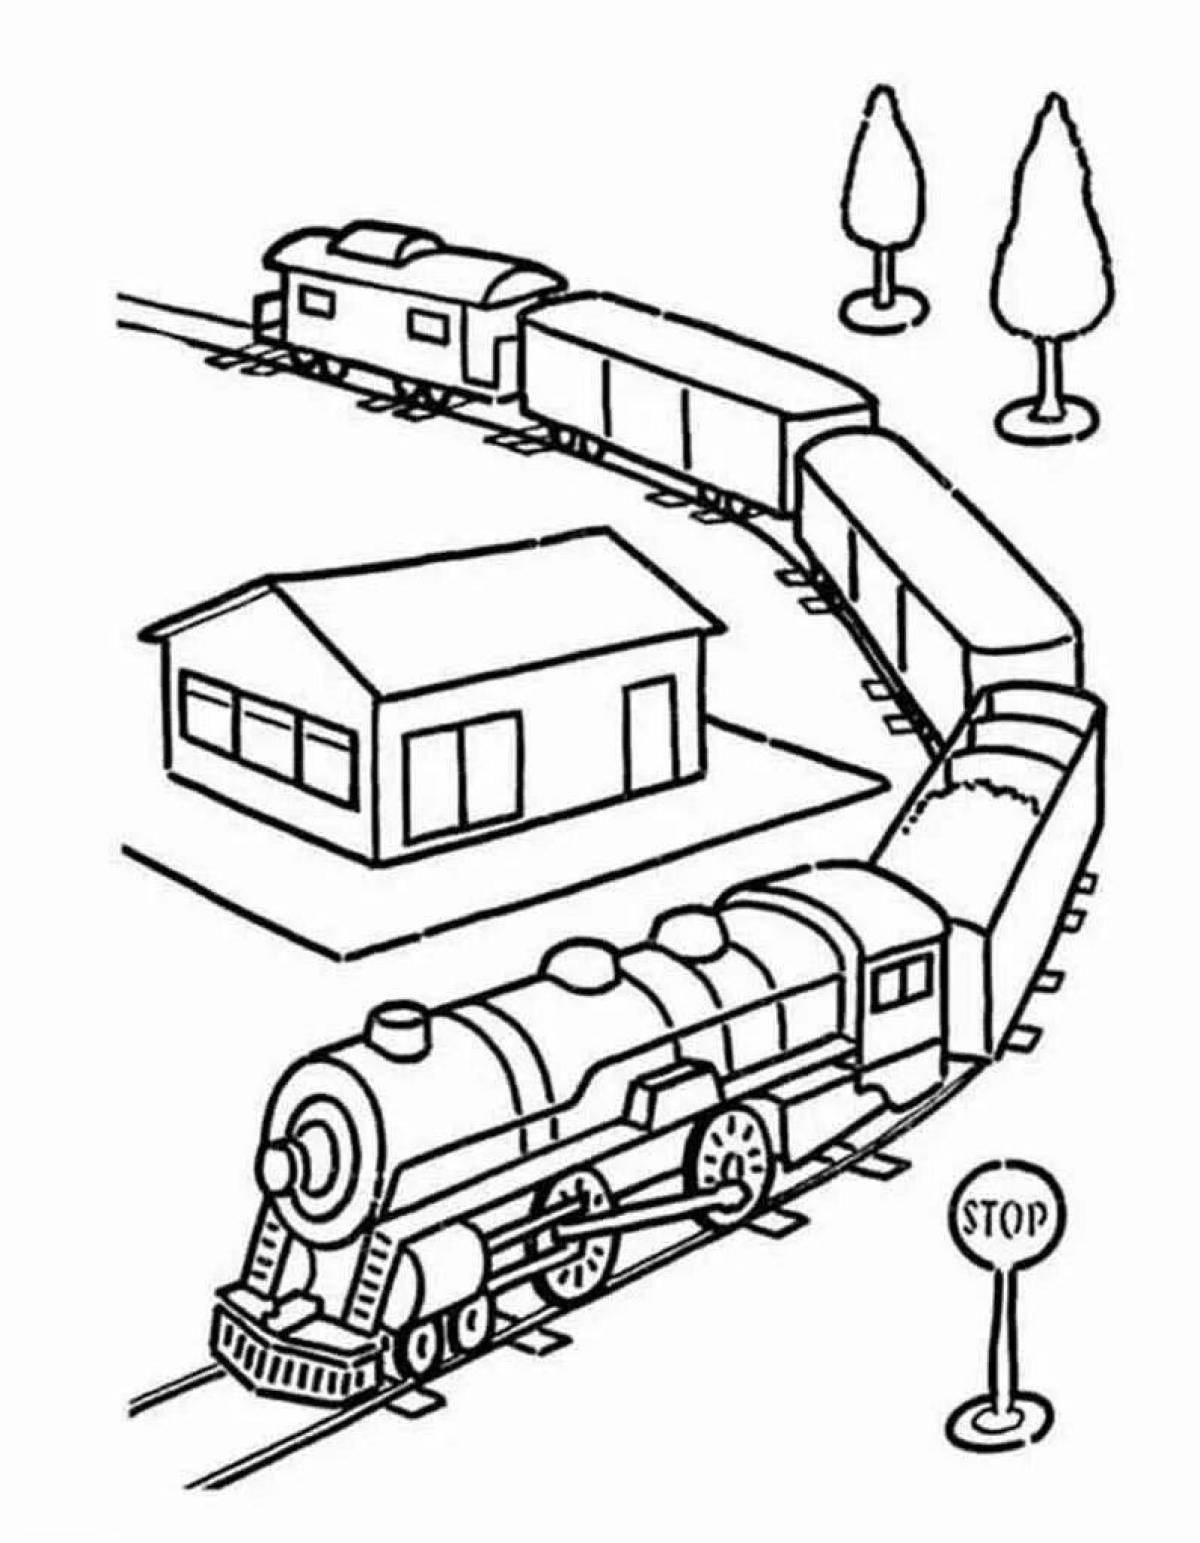 Adorable freight train coloring book for kids